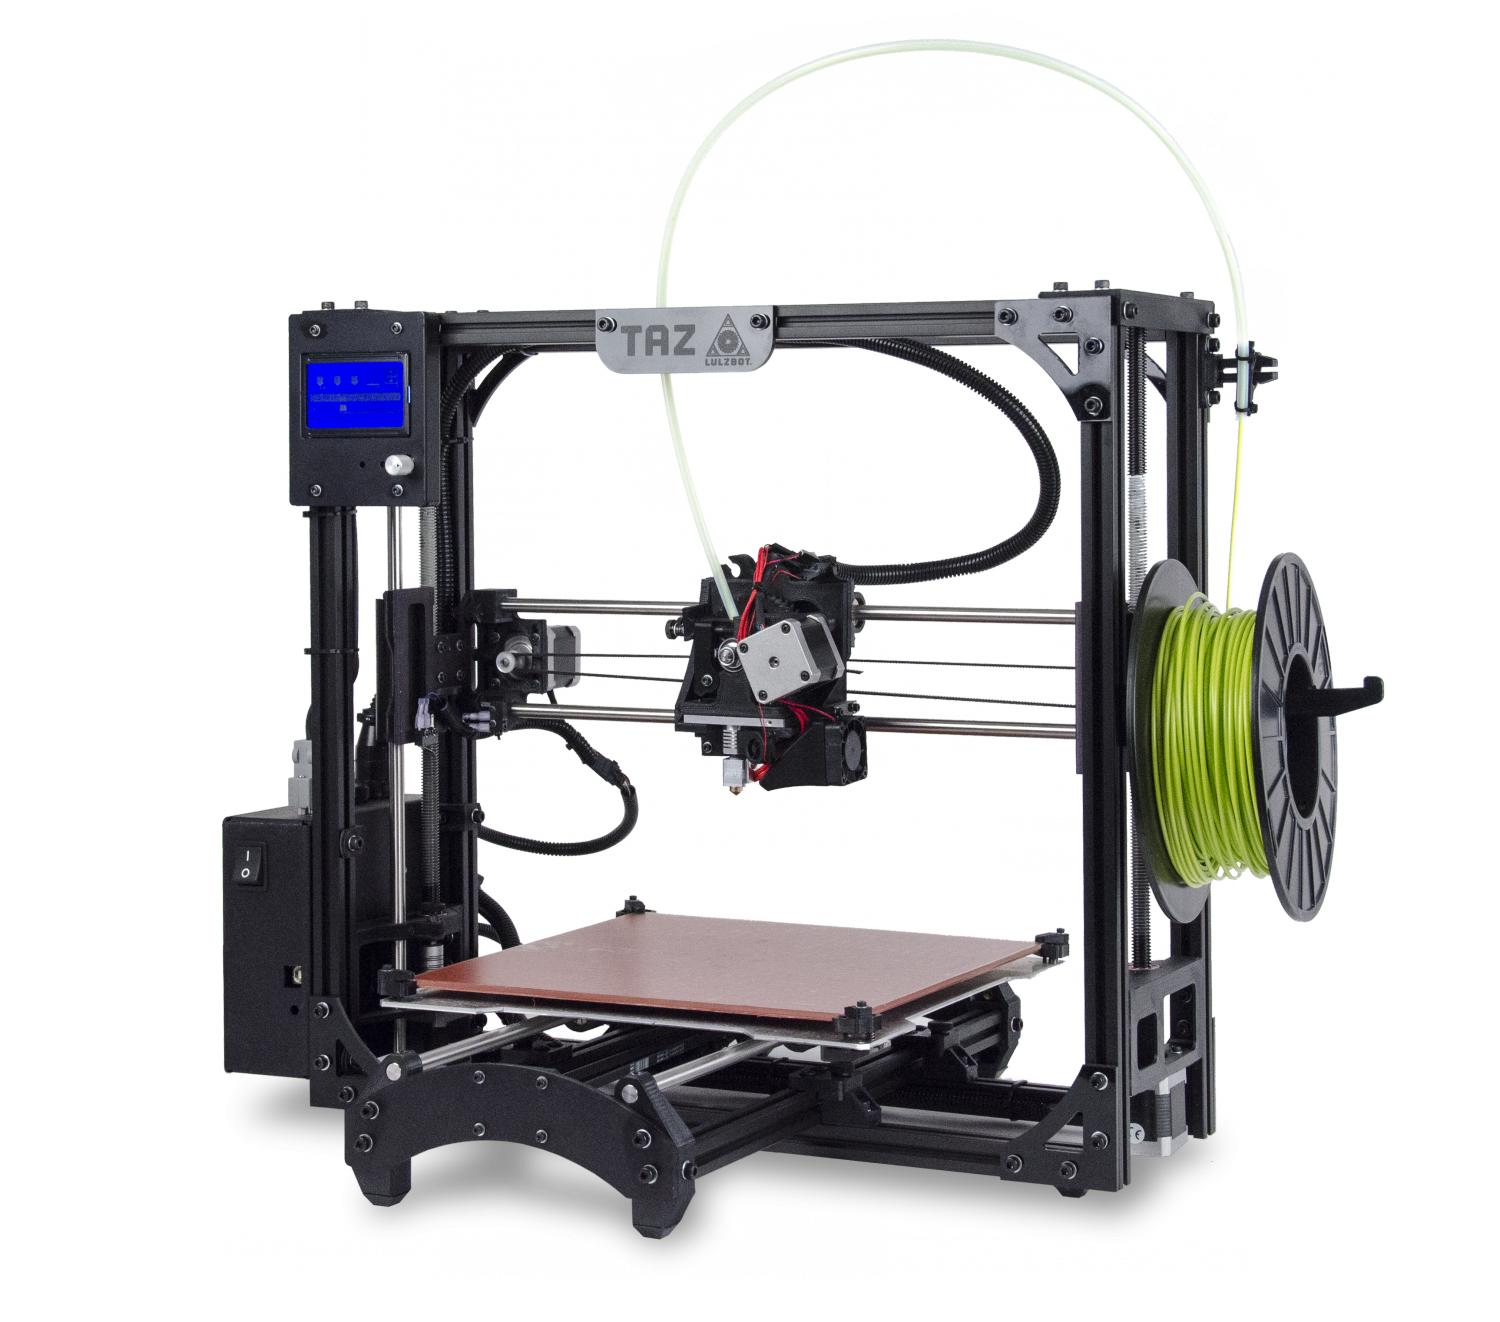 Lulzbot Skyrockets, Surprises With Early Taz 5 Release